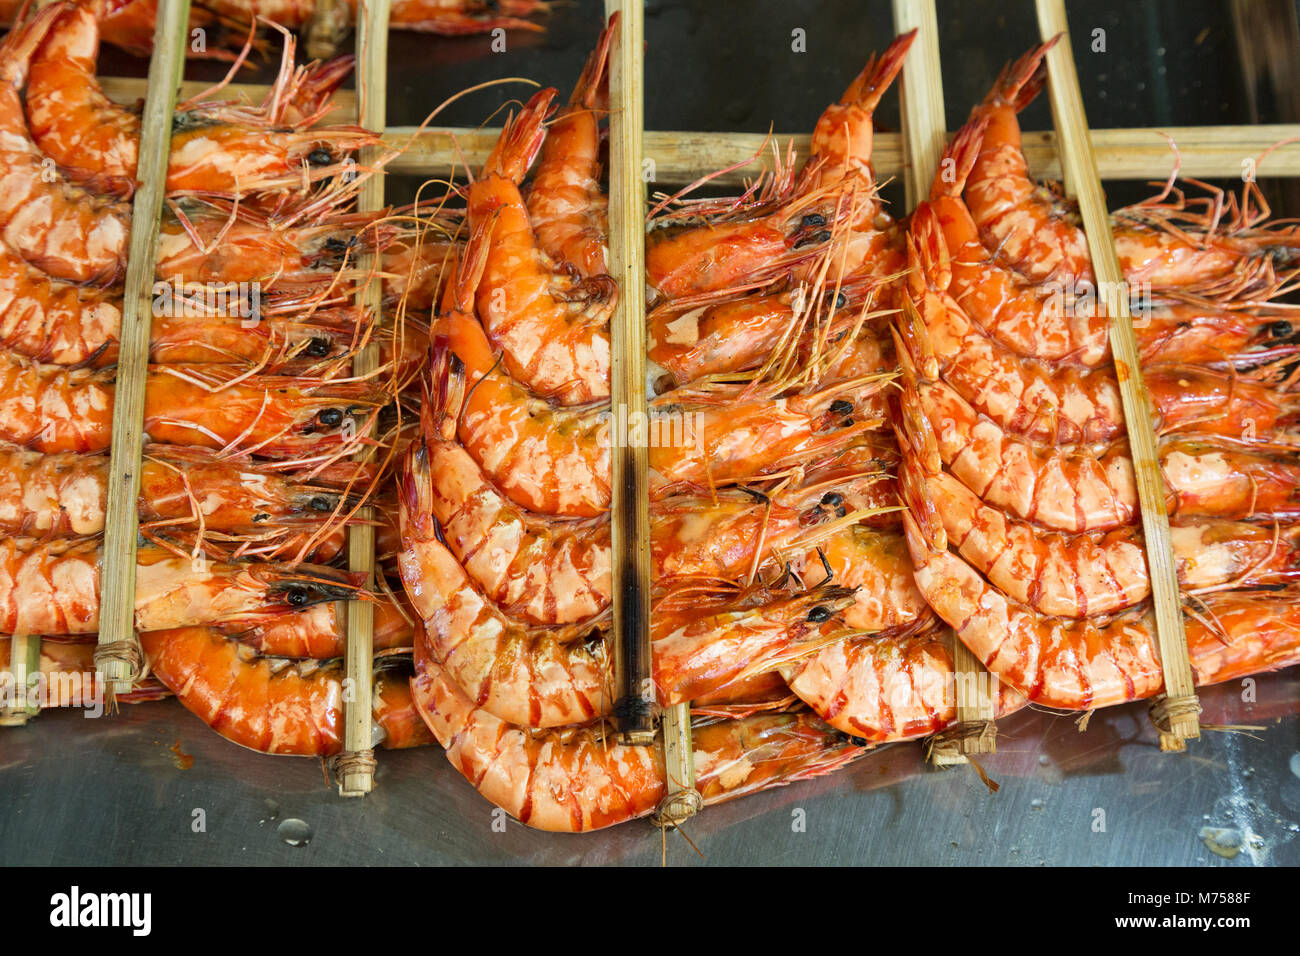 Kep crab market, - close up of grilled Prawns, or Shrimp, on sale in a market stall, Kep Crab Market, kep, Cambodia, Asia Stock Photo